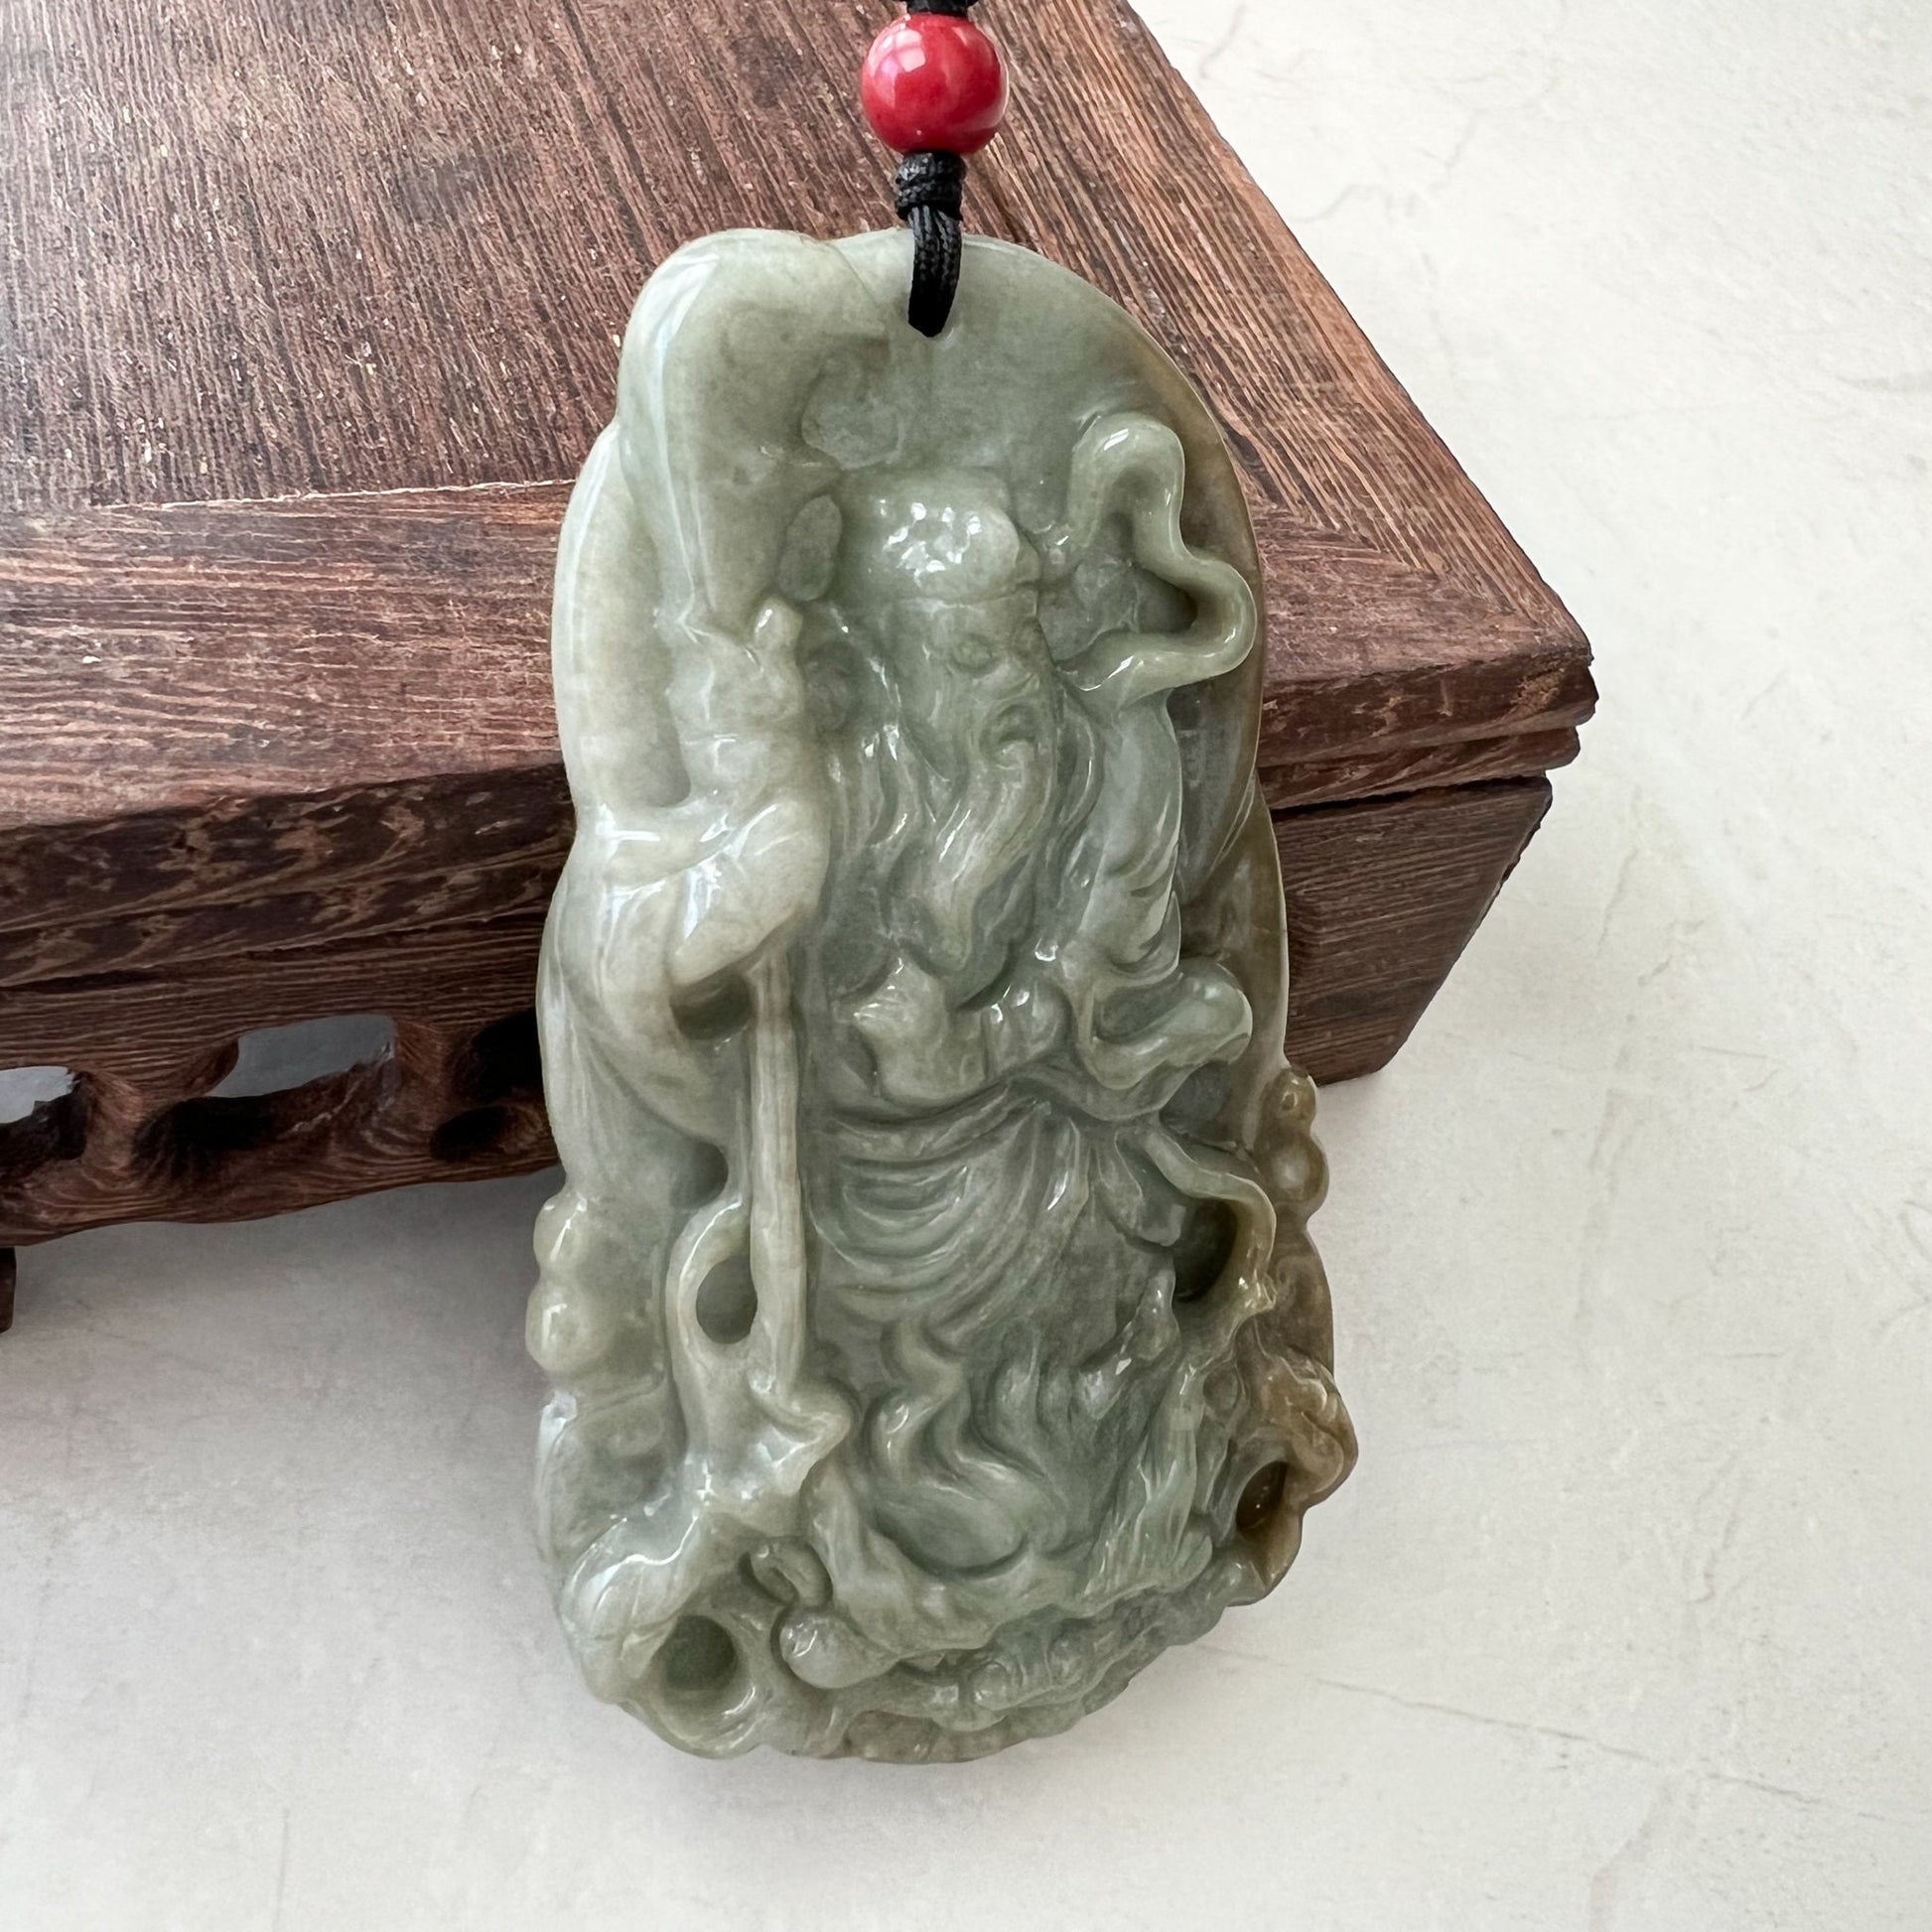 Guan Yu Guan Gong, Yellow and Green Jadeite Jade, God of Wealth and War, Hand Carved Pendant Necklace, YJ-1221-0134809 - AriaDesignCollection